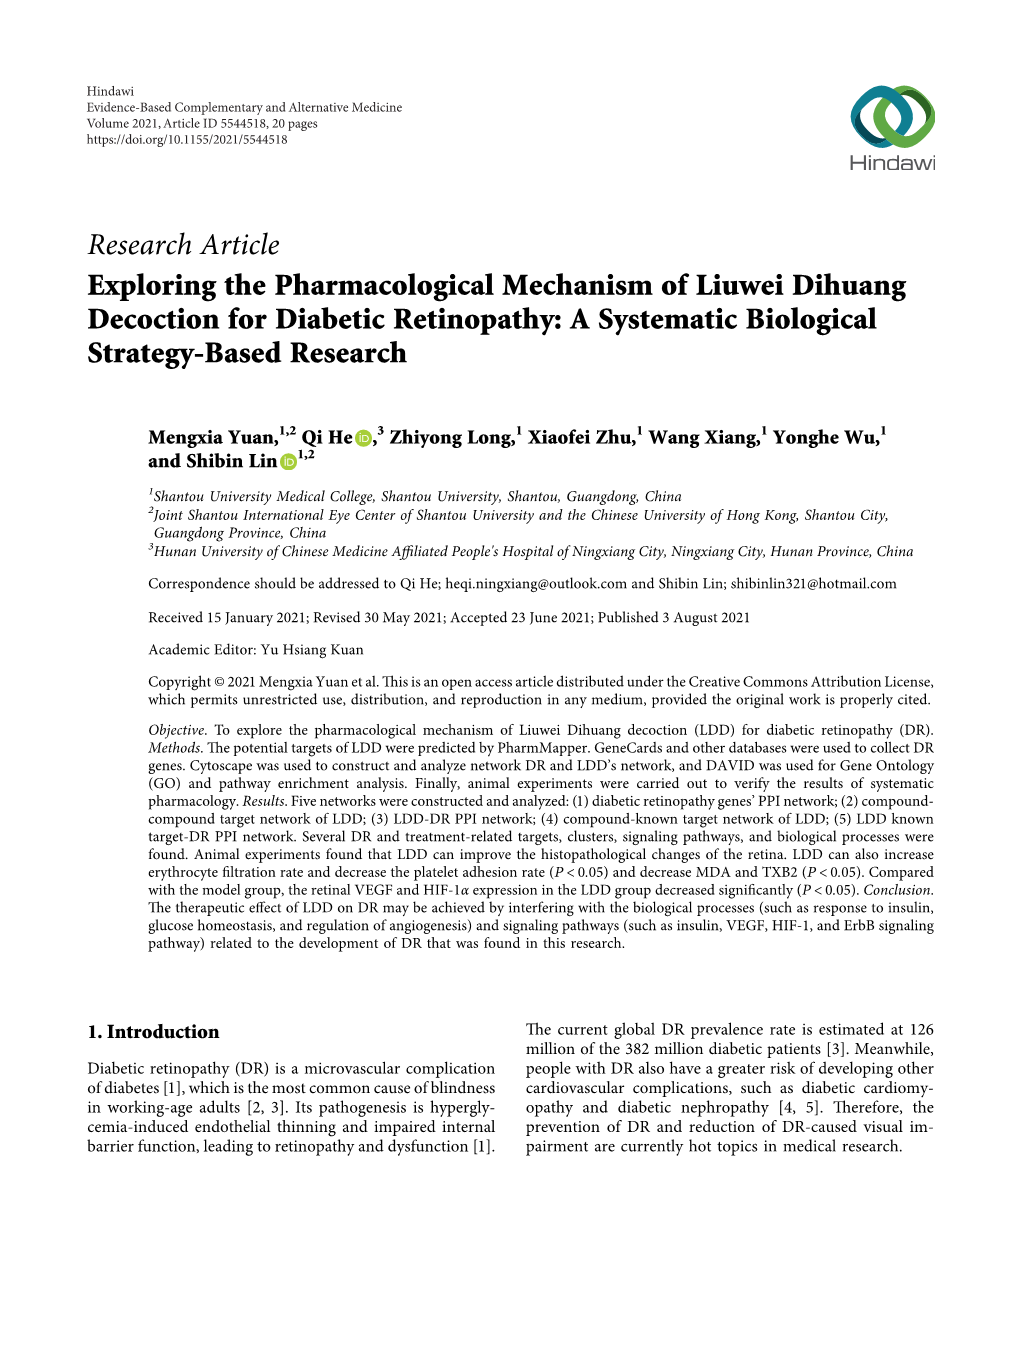 Exploring the Pharmacological Mechanism of Liuwei Dihuang Decoction for Diabetic Retinopathy: a Systematic Biological Strategy-Based Research